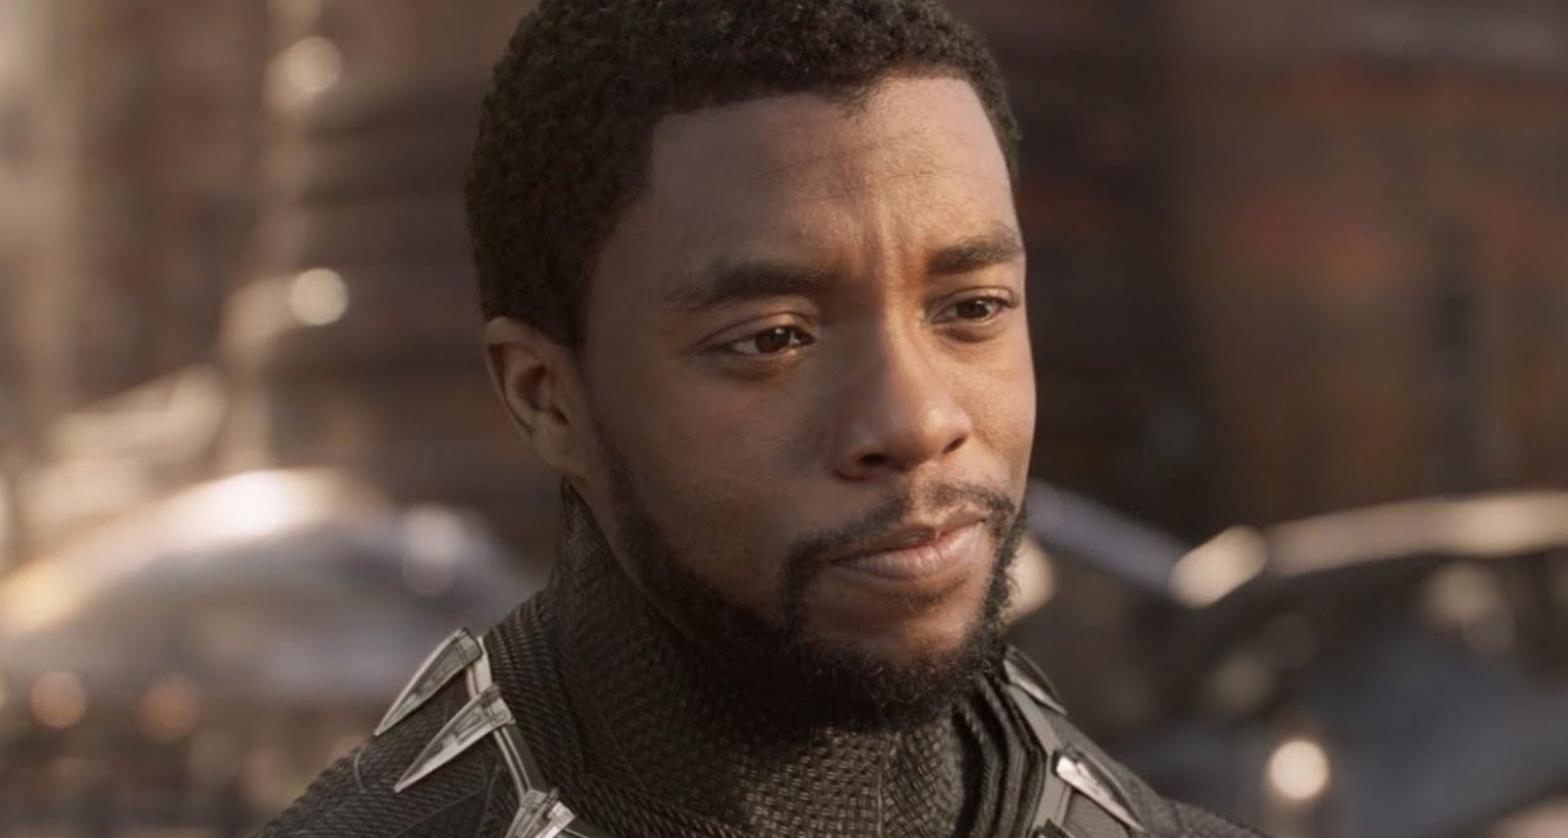 Chadwick Boseman is well-represented in Black Panther: Wakanda Forever. (Image: Marvel Studios)